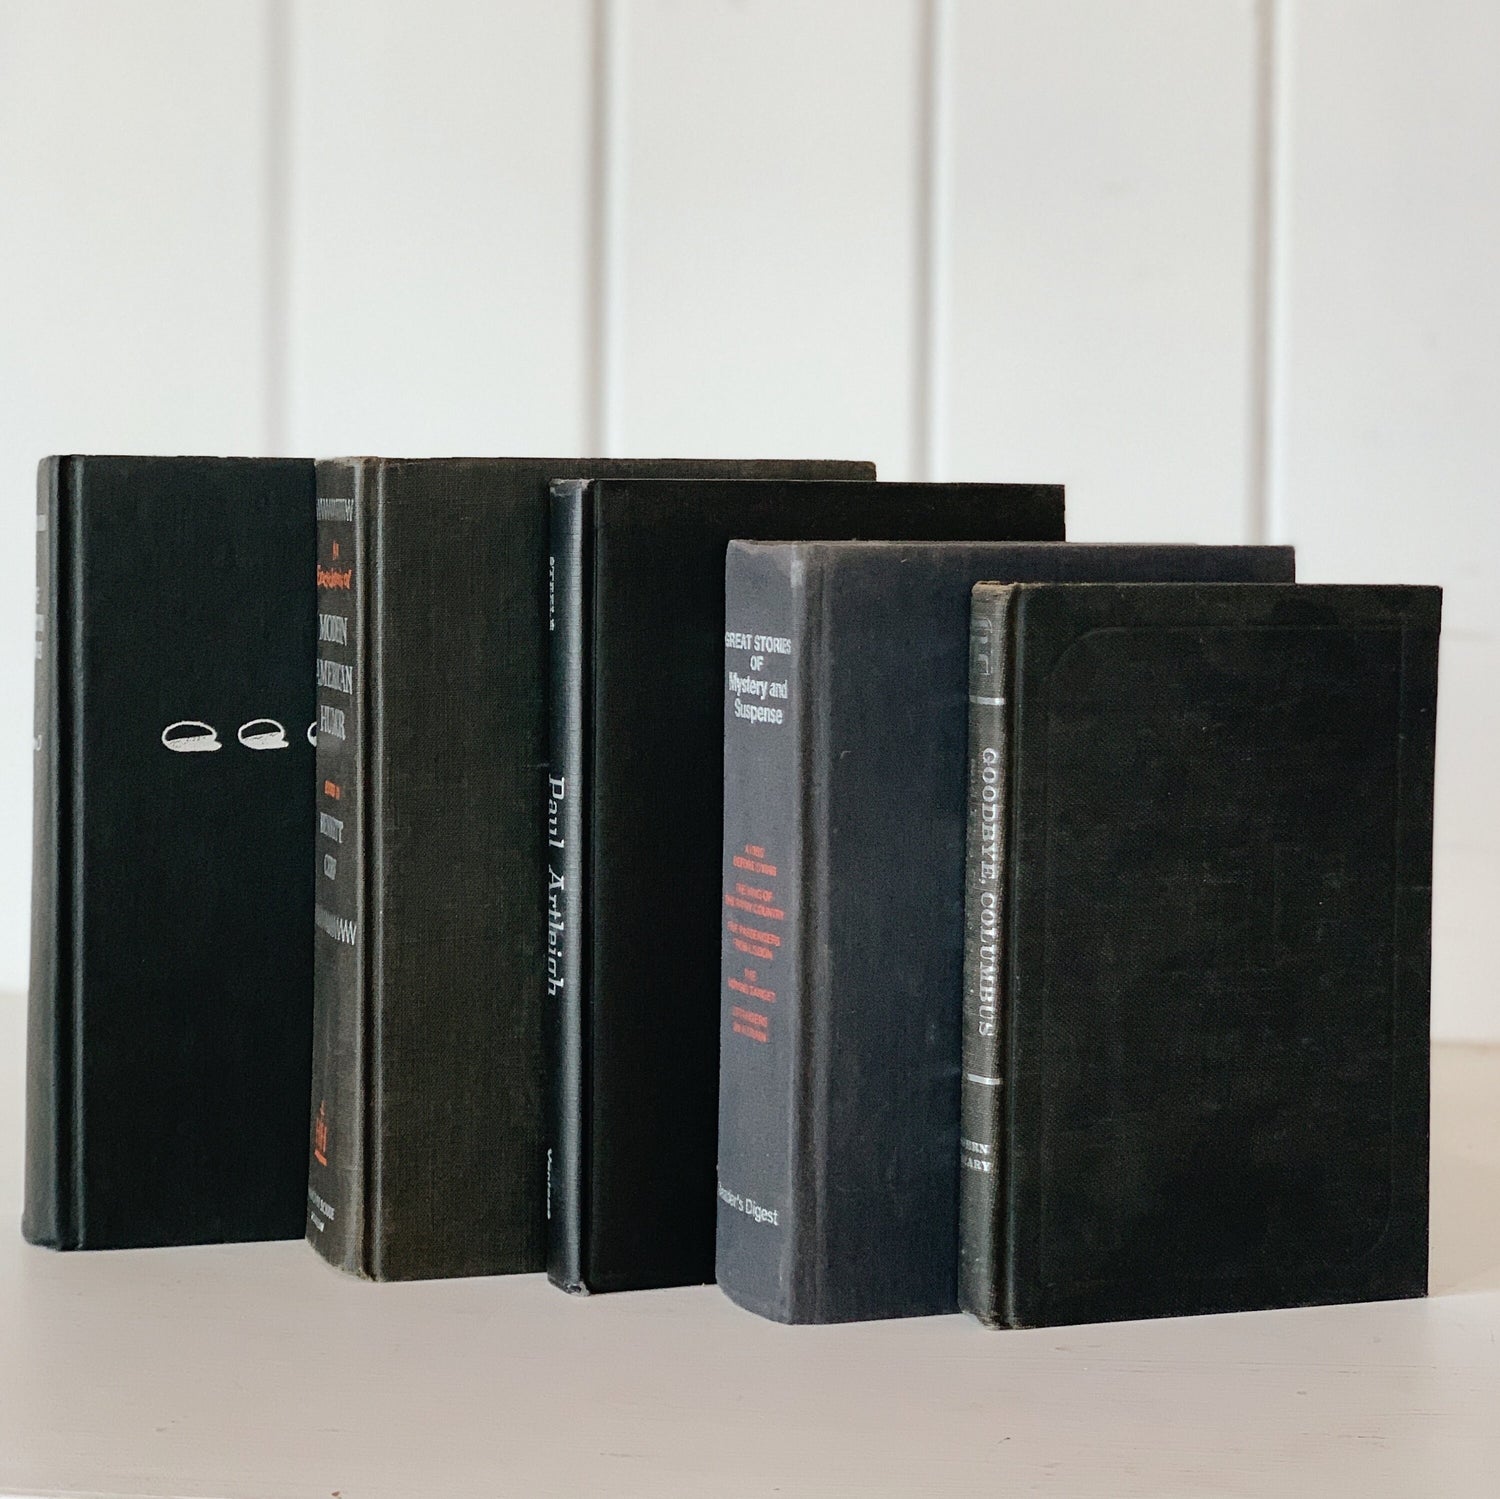 Black Silver and Red Vintage Books, Books By Color For Bookshelf Decor, Masculine Office Shelf Styling